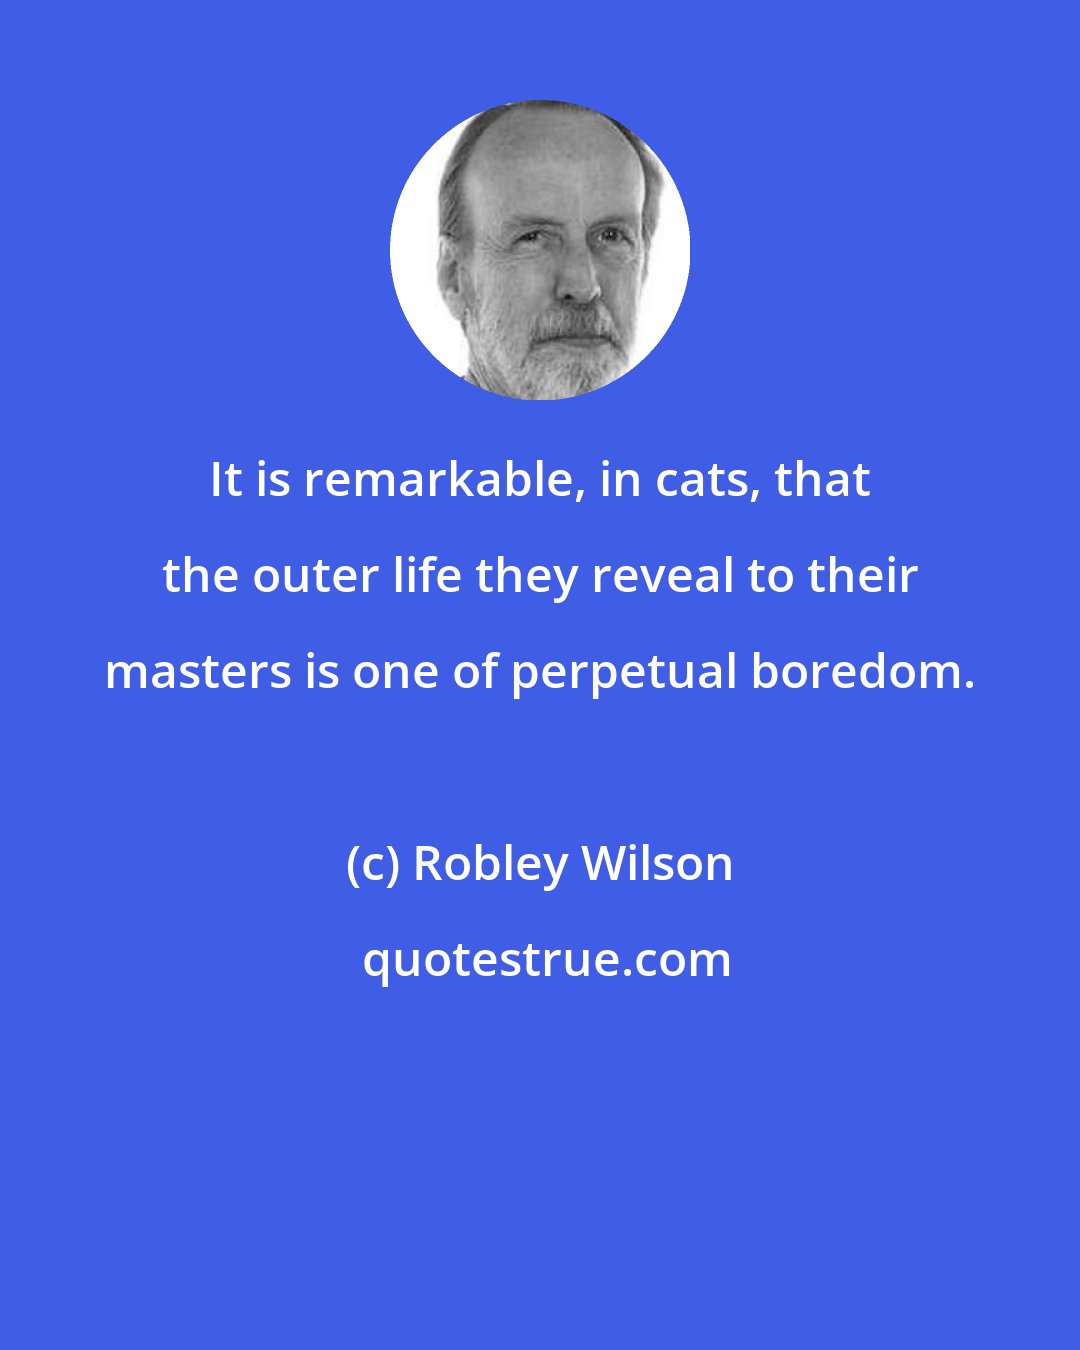 Robley Wilson: It is remarkable, in cats, that the outer life they reveal to their masters is one of perpetual boredom.